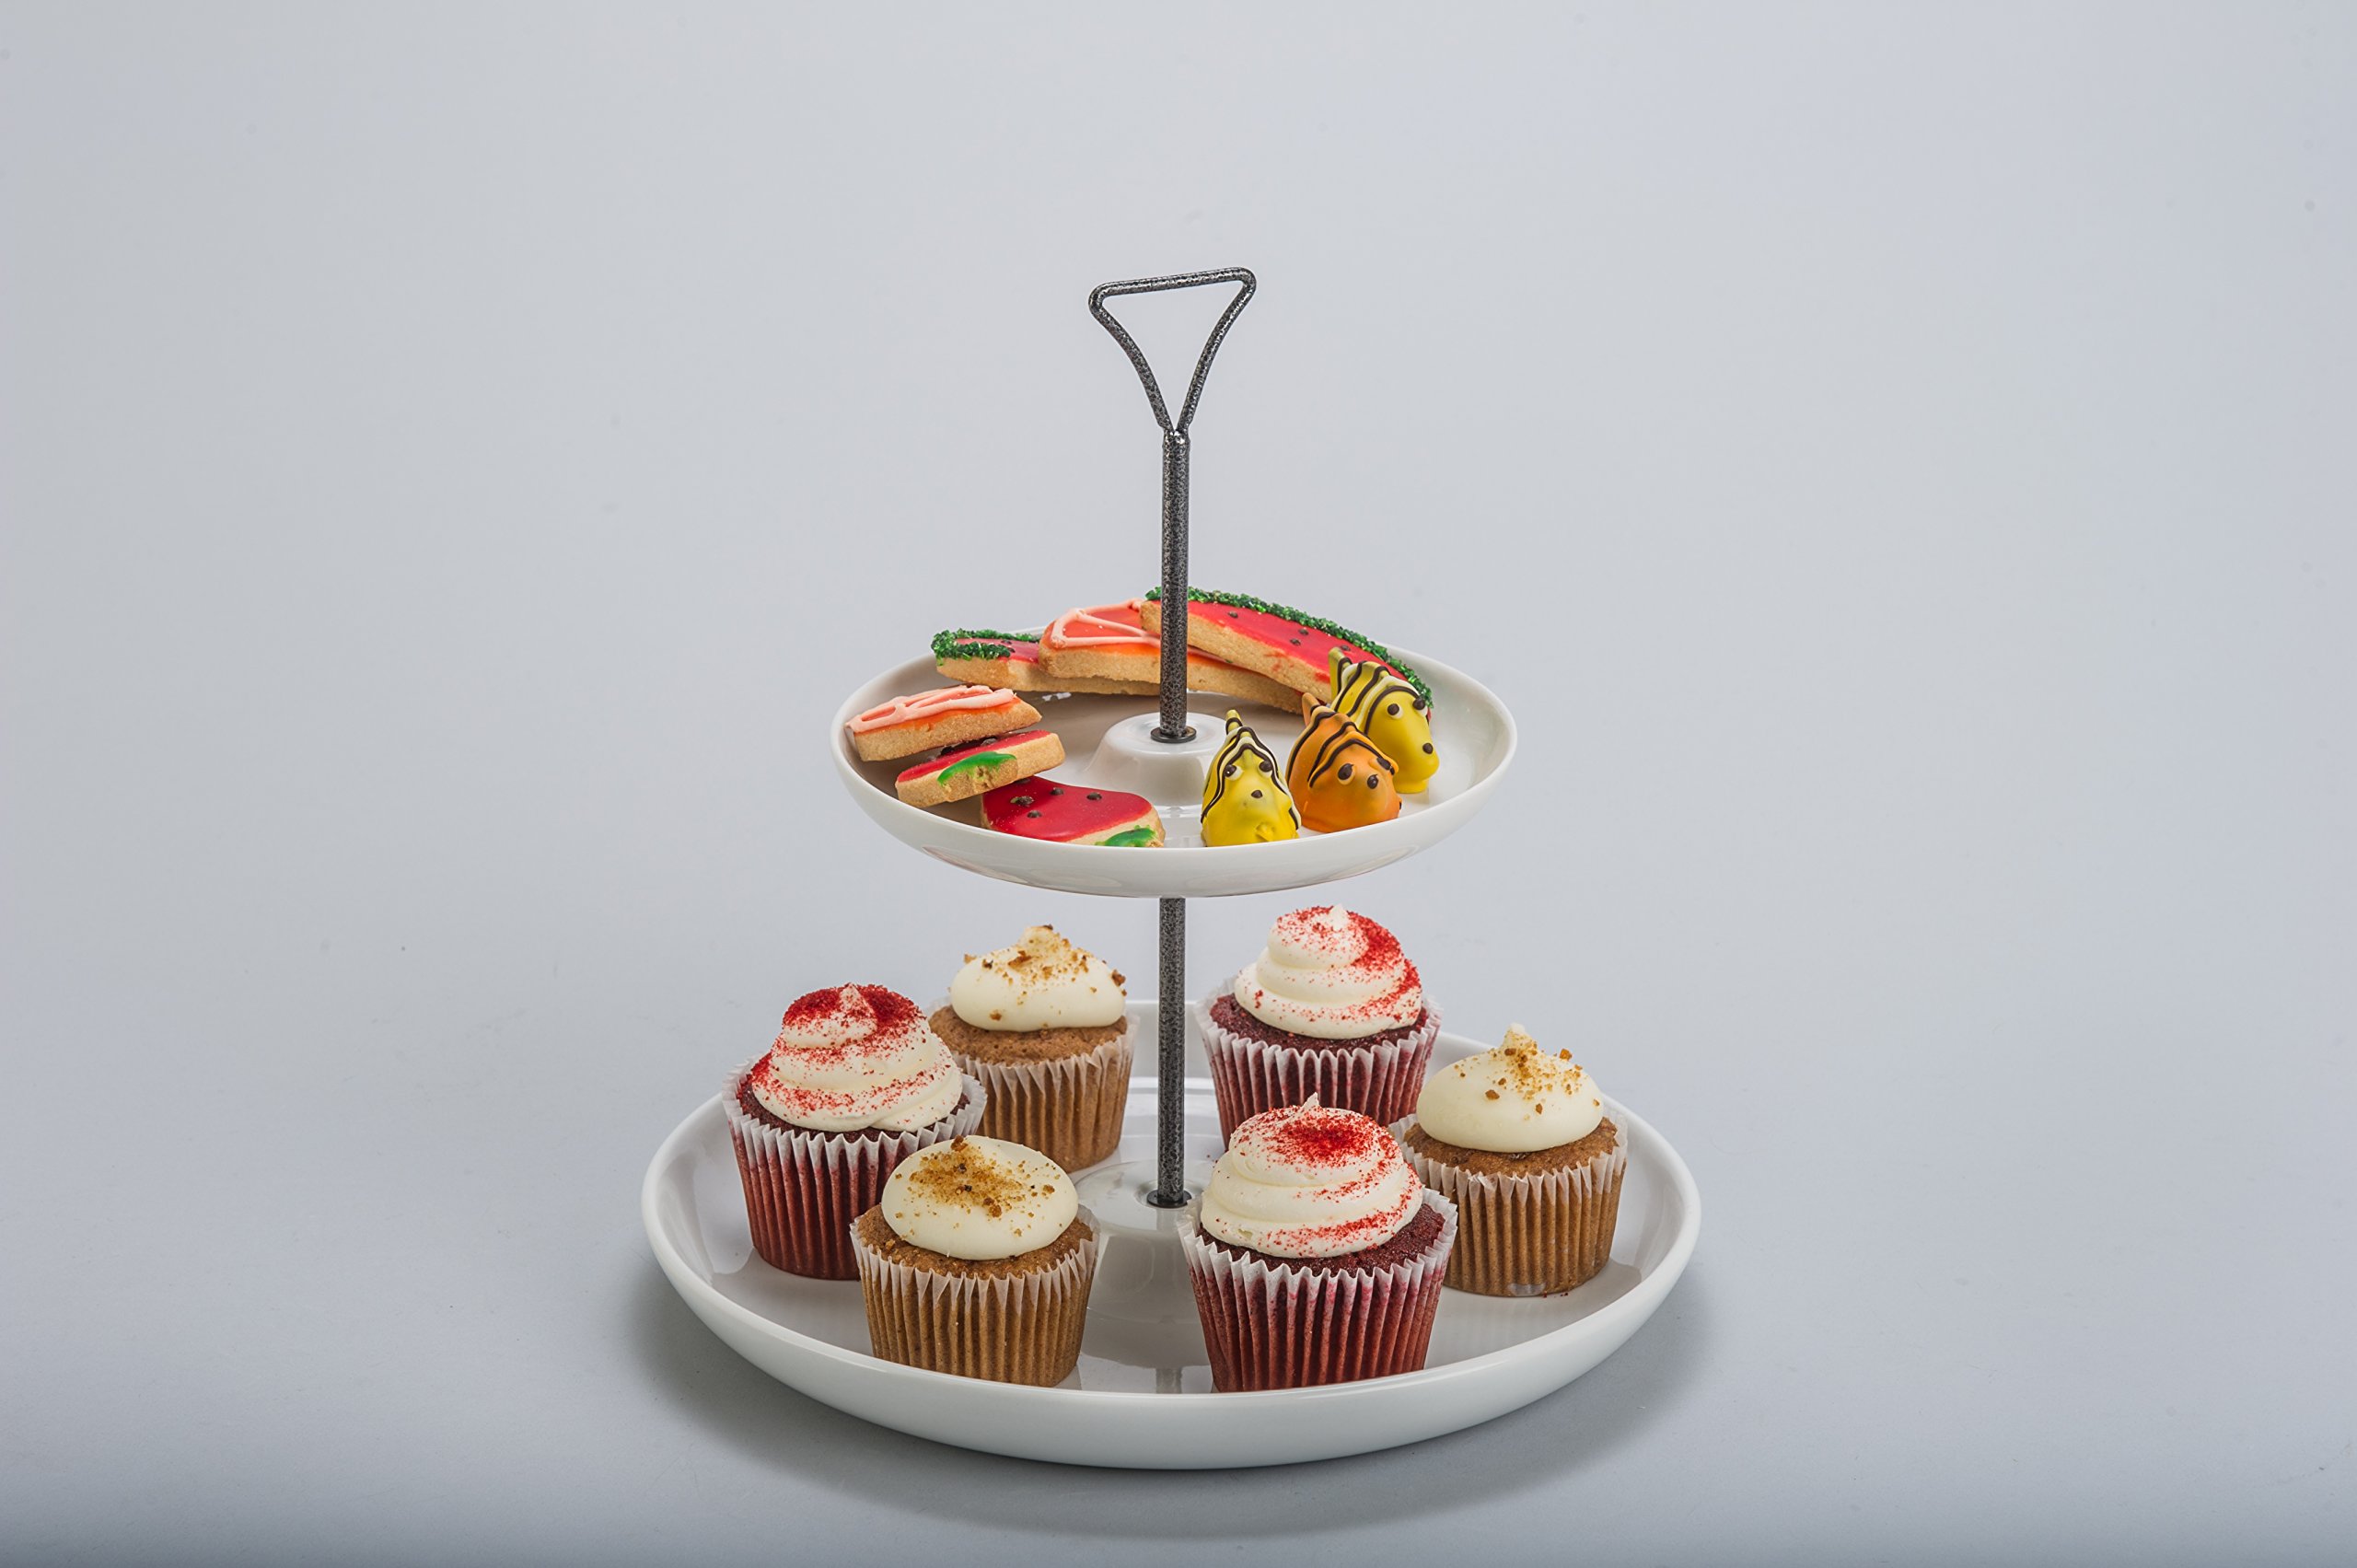 BIA Cordon Bleu 3-Tier Serving Tray for Appetizers or Cupcakes, White (Model: 904066S1SIOC)